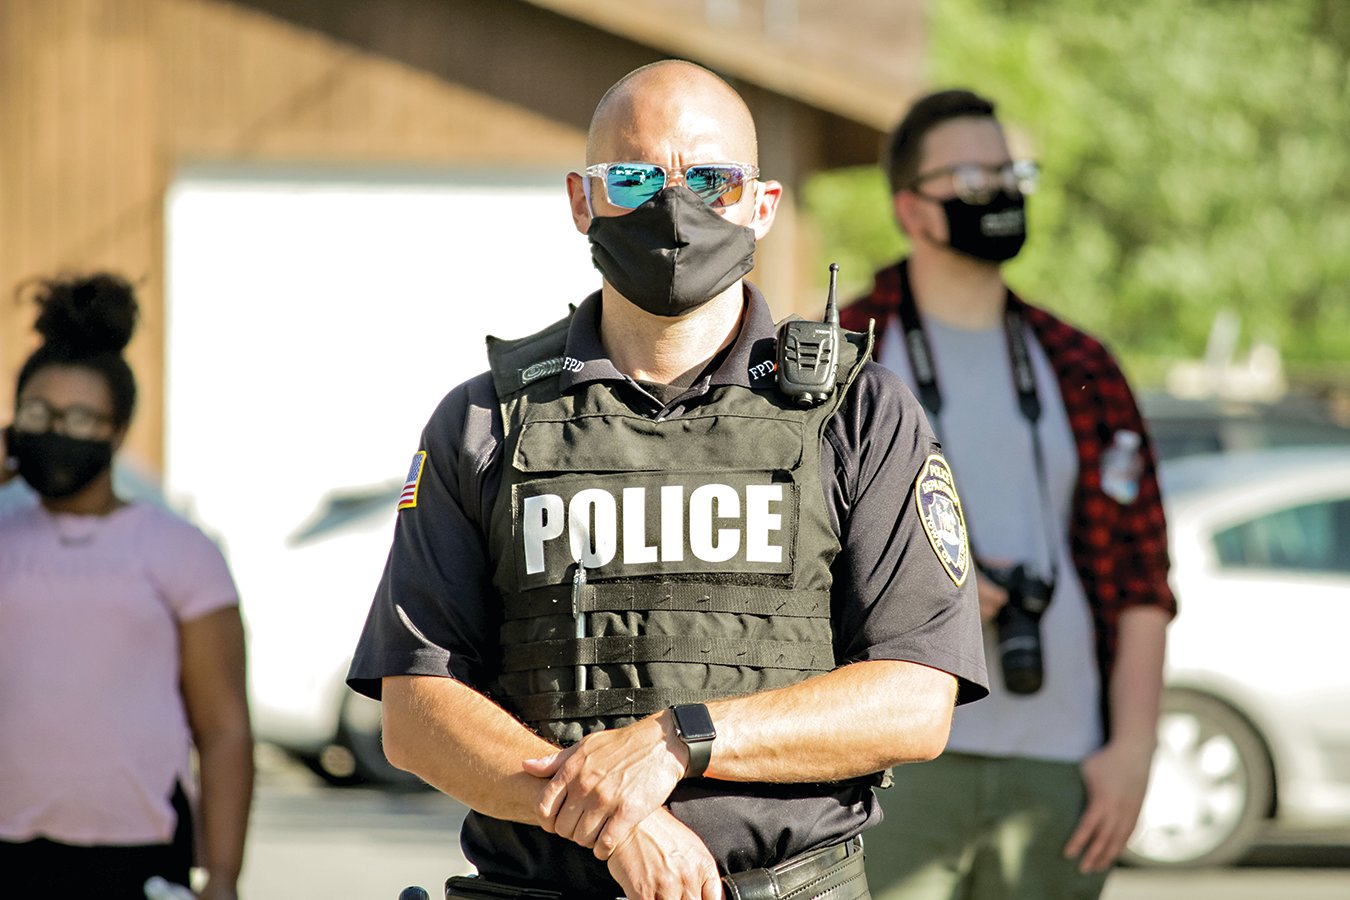 A Fallsburg Police Officer during a Black Lives Matter Rally in 2020, which led to Fallsburg passing Police Reform measures, which will be revamped in 2023.